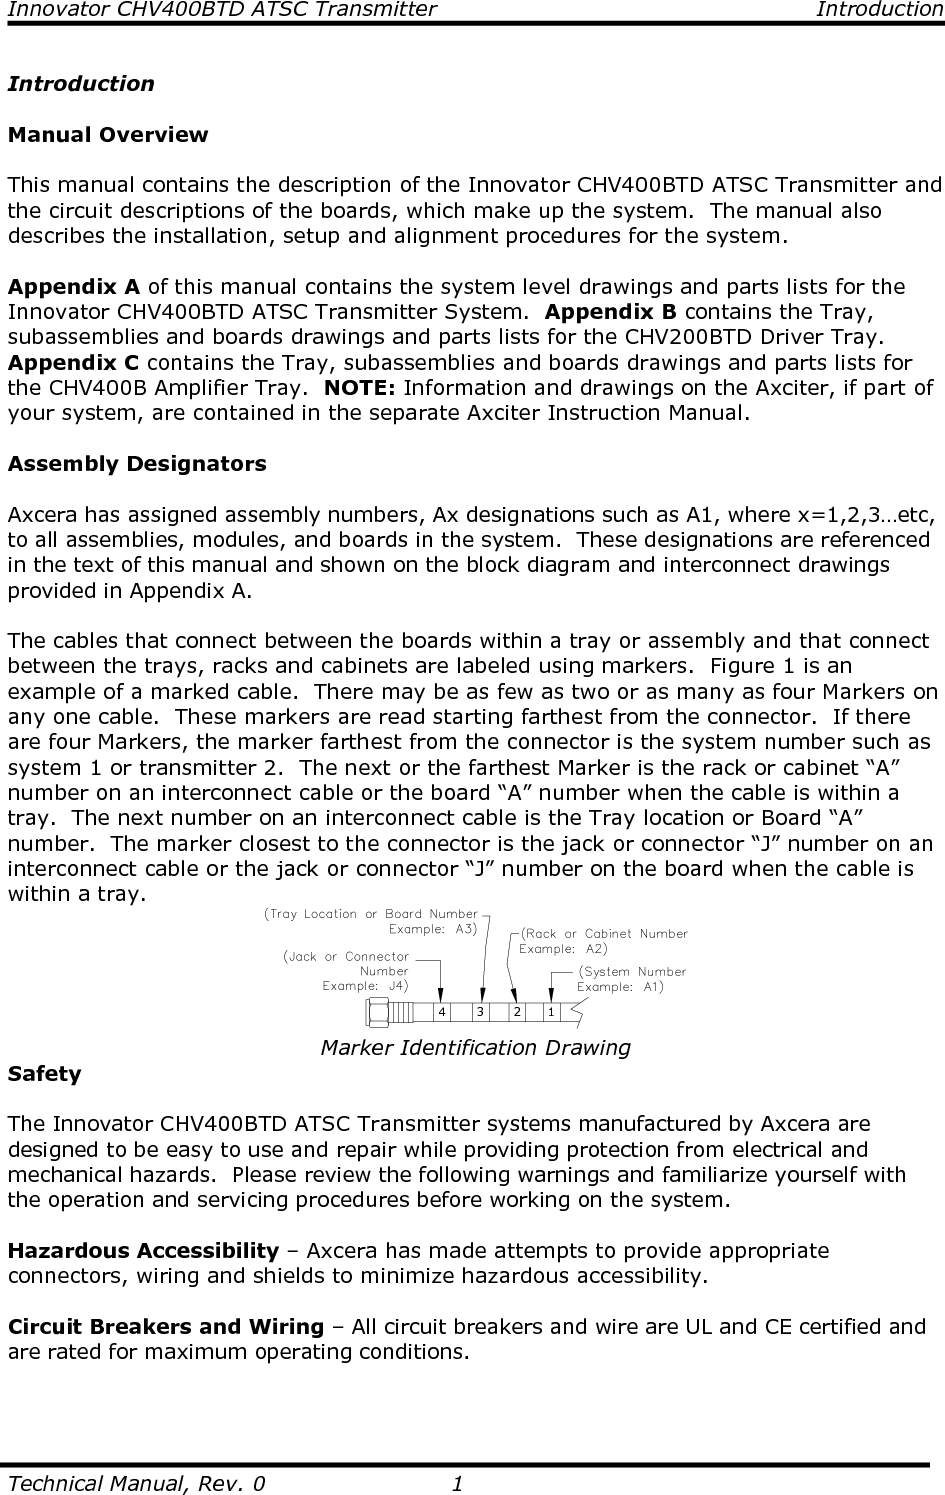 Innovator CHV400BTD ATSC Transmitter  Introduction  Technical Manual, Rev. 0  1 Introduction  Manual Overview  This manual contains the description of the Innovator CHV400BTD ATSC Transmitter and the circuit descriptions of the boards, which make up the system.  The manual also describes the installation, setup and alignment procedures for the system.  Appendix A of this manual contains the system level drawings and parts lists for the Innovator CHV400BTD ATSC Transmitter System.  Appendix B contains the Tray, subassemblies and boards drawings and parts lists for the CHV200BTD Driver Tray.  Appendix C contains the Tray, subassemblies and boards drawings and parts lists for the CHV400B Amplifier Tray.  NOTE: Information and drawings on the Axciter, if part of your system, are contained in the separate Axciter Instruction Manual.    Assembly Designators  Axcera has assigned assembly numbers, Ax designations such as A1, where x=1,2,3…etc, to all assemblies, modules, and boards in the system.  These designations are referenced in the text of this manual and shown on the block diagram and interconnect drawings provided in Appendix A.  The cables that connect between the boards within a tray or assembly and that connect between the trays, racks and cabinets are labeled using markers.  Figure 1 is an example of a marked cable.  There may be as few as two or as many as four Markers on any one cable.  These markers are read starting farthest from the connector.  If there are four Markers, the marker farthest from the connector is the system number such as system 1 or transmitter 2.  The next or the farthest Marker is the rack or cabinet “A” number on an interconnect cable or the board “A” number when the cable is within a tray.  The next number on an interconnect cable is the Tray location or Board “A” number.  The marker closest to the connector is the jack or connector “J” number on an interconnect cable or the jack or connector “J” number on the board when the cable is within a tray. 4 3 2 1 Marker Identification Drawing Safety  The Innovator CHV400BTD ATSC Transmitter systems manufactured by Axcera are designed to be easy to use and repair while providing protection from electrical and mechanical hazards.  Please review the following warnings and familiarize yourself with the operation and servicing procedures before working on the system.  Hazardous Accessibility – Axcera has made attempts to provide appropriate connectors, wiring and shields to minimize hazardous accessibility.  Circuit Breakers and Wiring – All circuit breakers and wire are UL and CE certified and are rated for maximum operating conditions.  